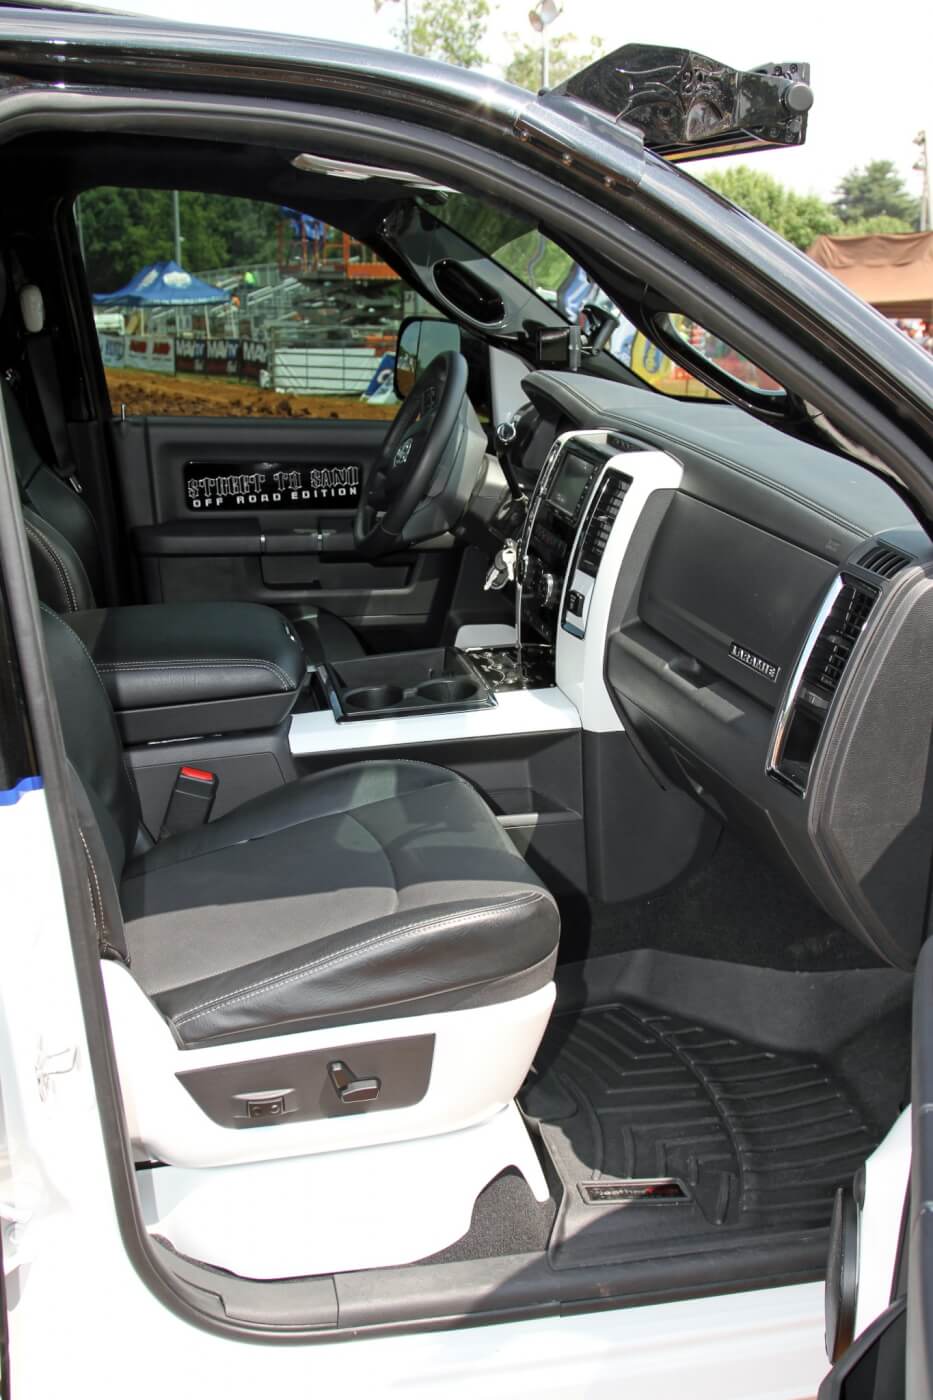 All of the truck’s plastic interior parts were treated to a coating of metallic black or bright white paint to match the exterior. The seats were reupholstered in black leather with perforated inserts embroidered with the S2S logo.